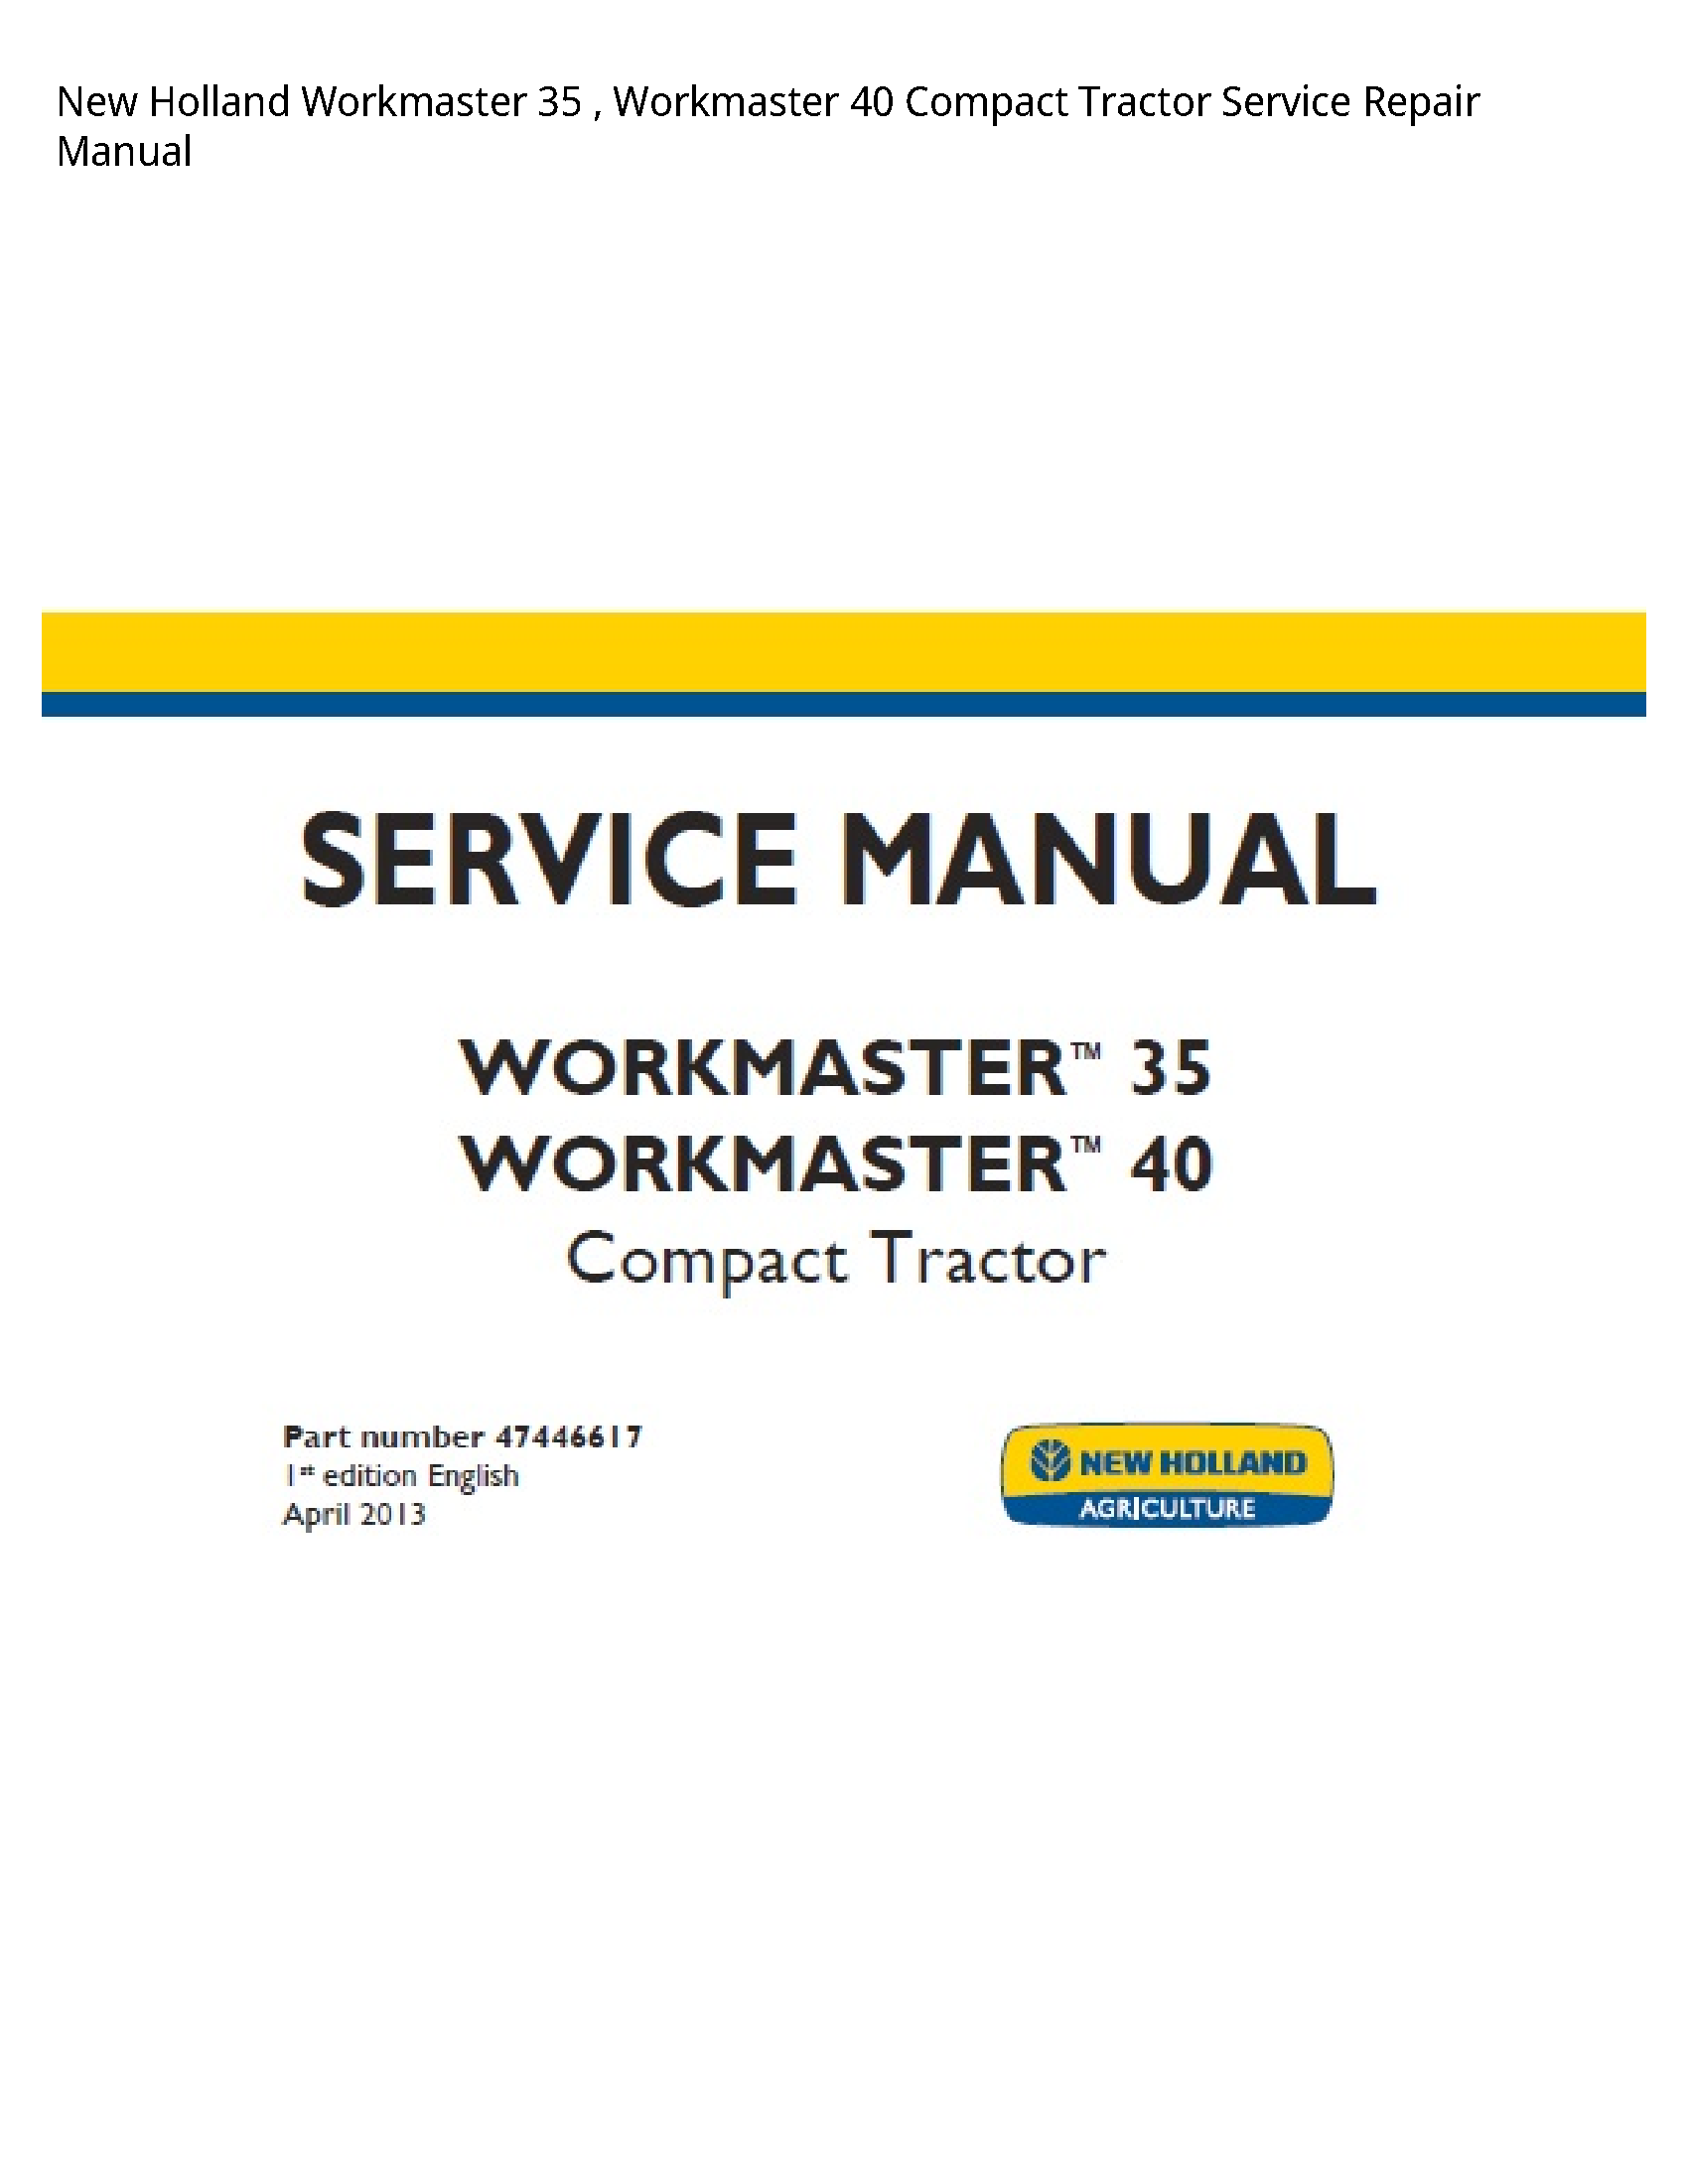 New Holland 35 Workmaster Workmaster Compact Tractor manual